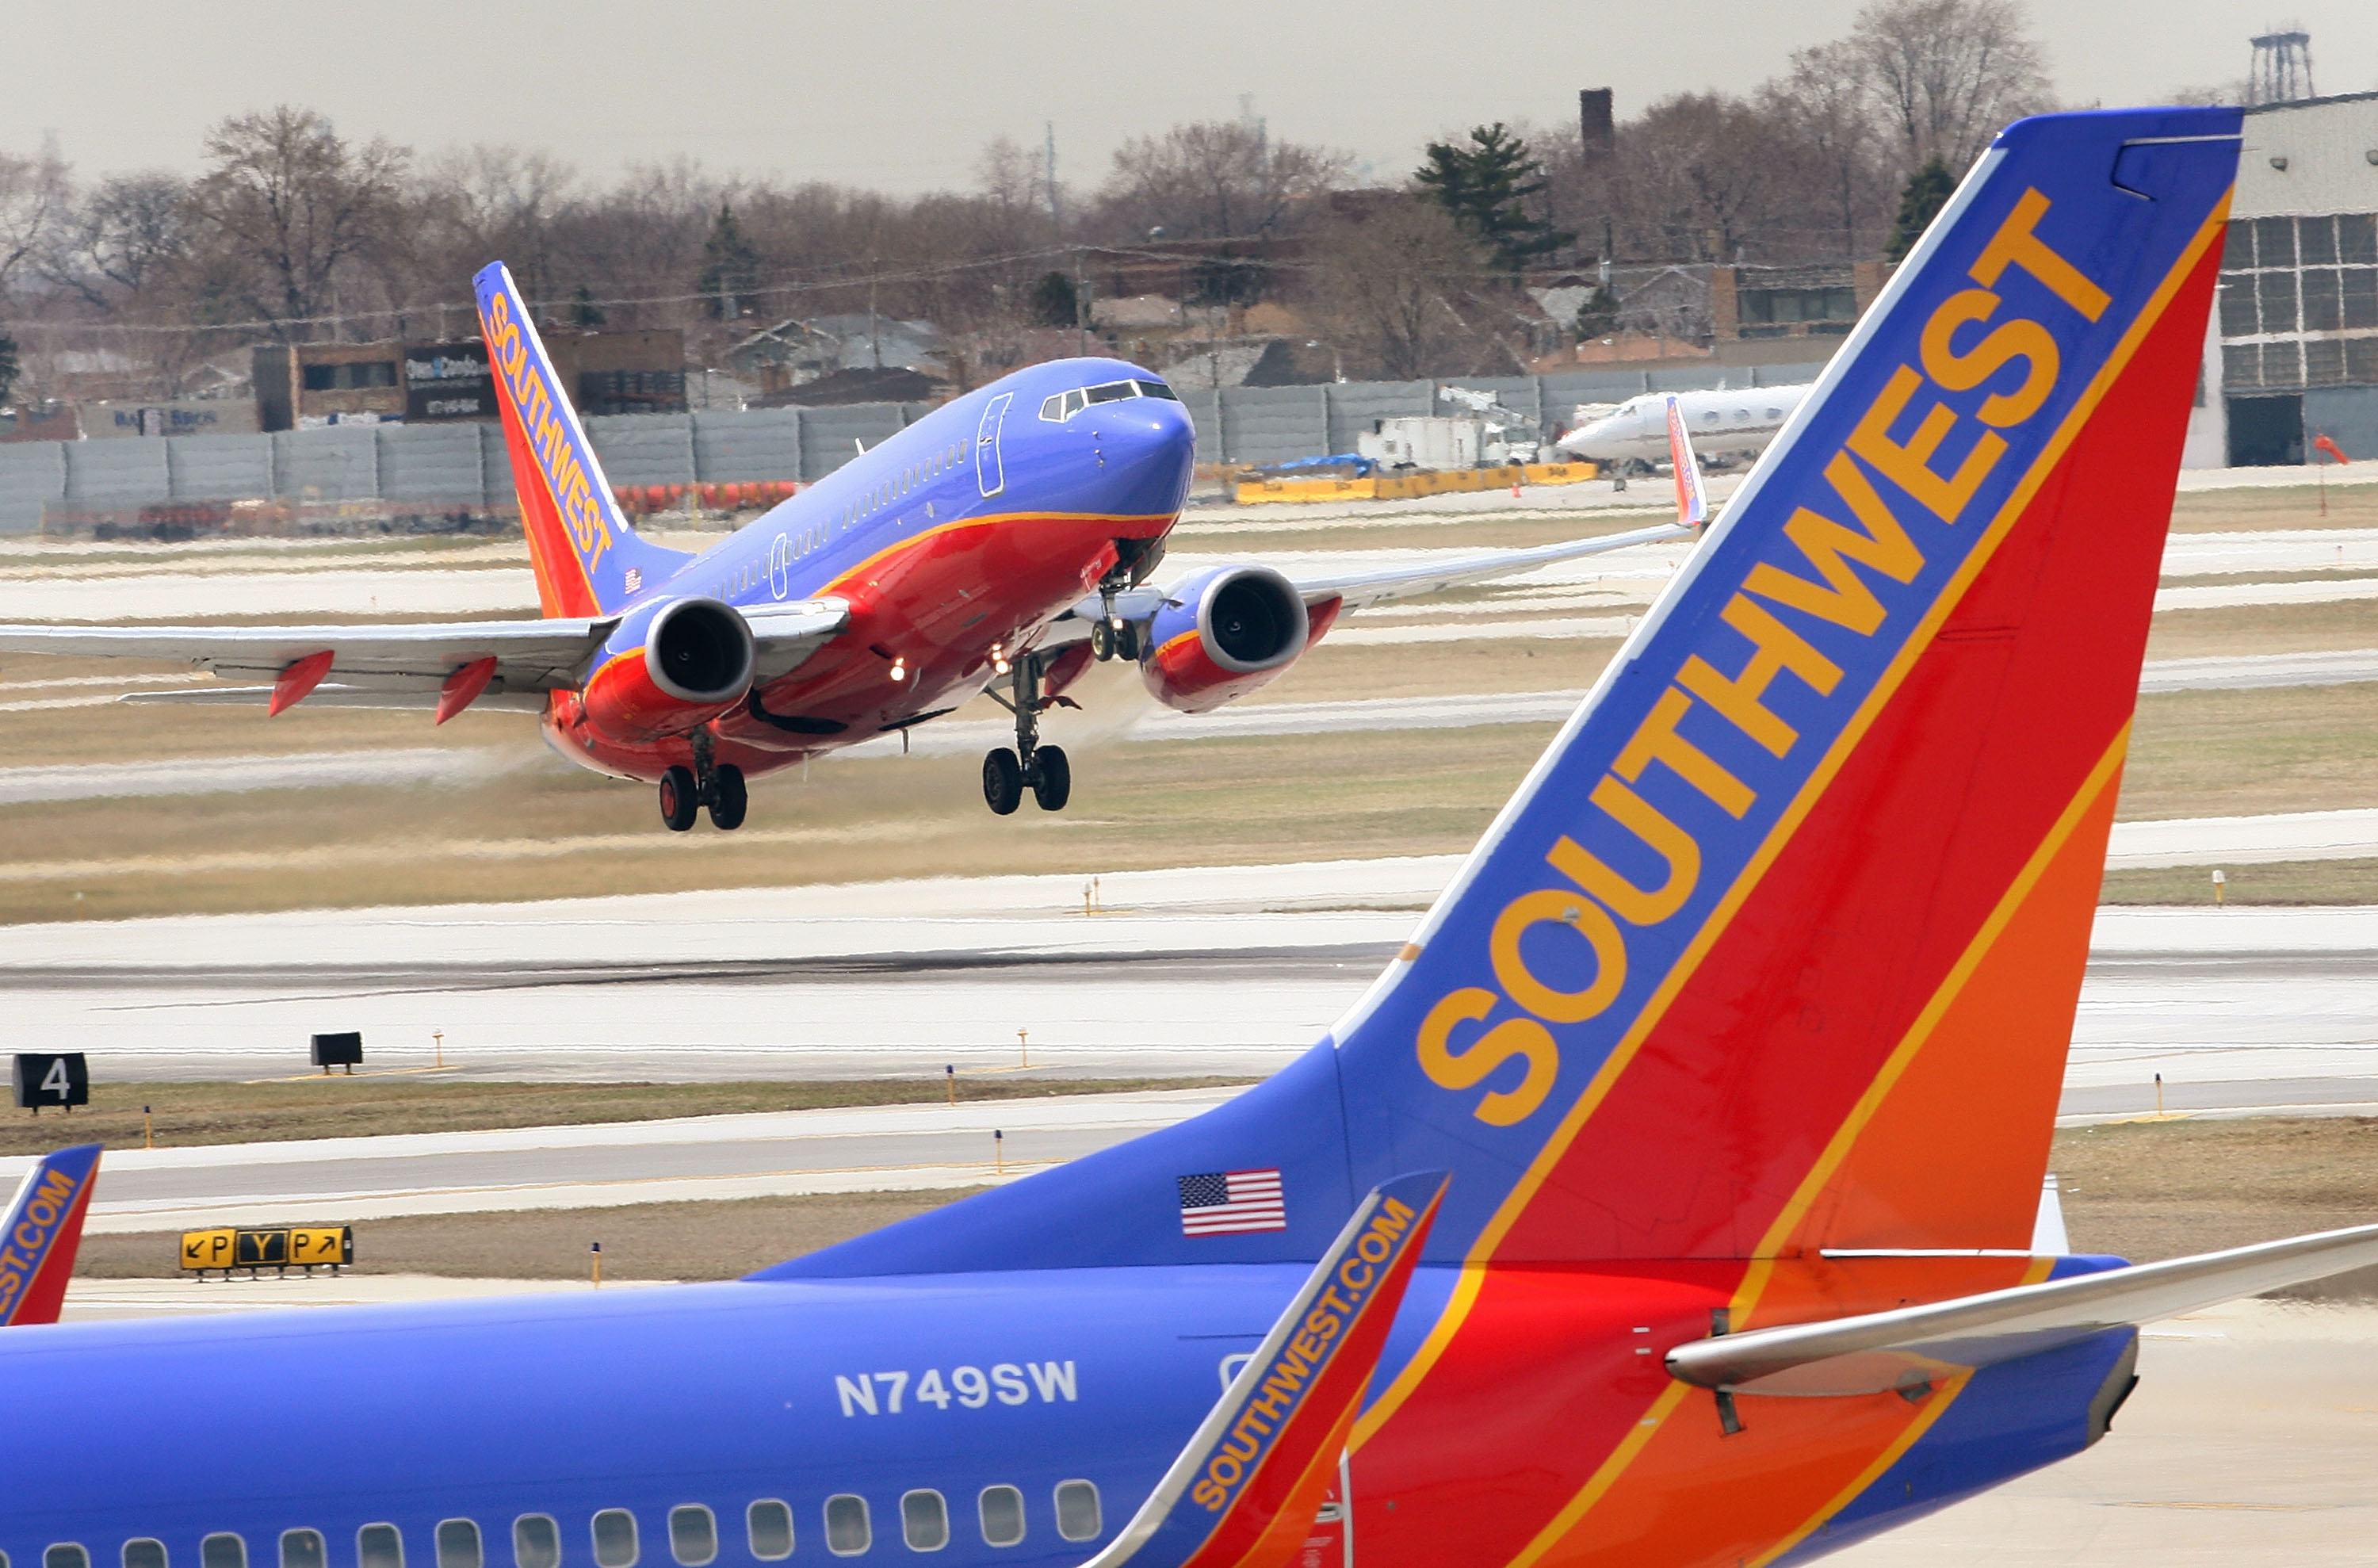 A Southwest Airlines jet takes off at Midway Airport April 3, 2008 in Chicago, Illinois. (Scott Olson&mdash;Getty Images)